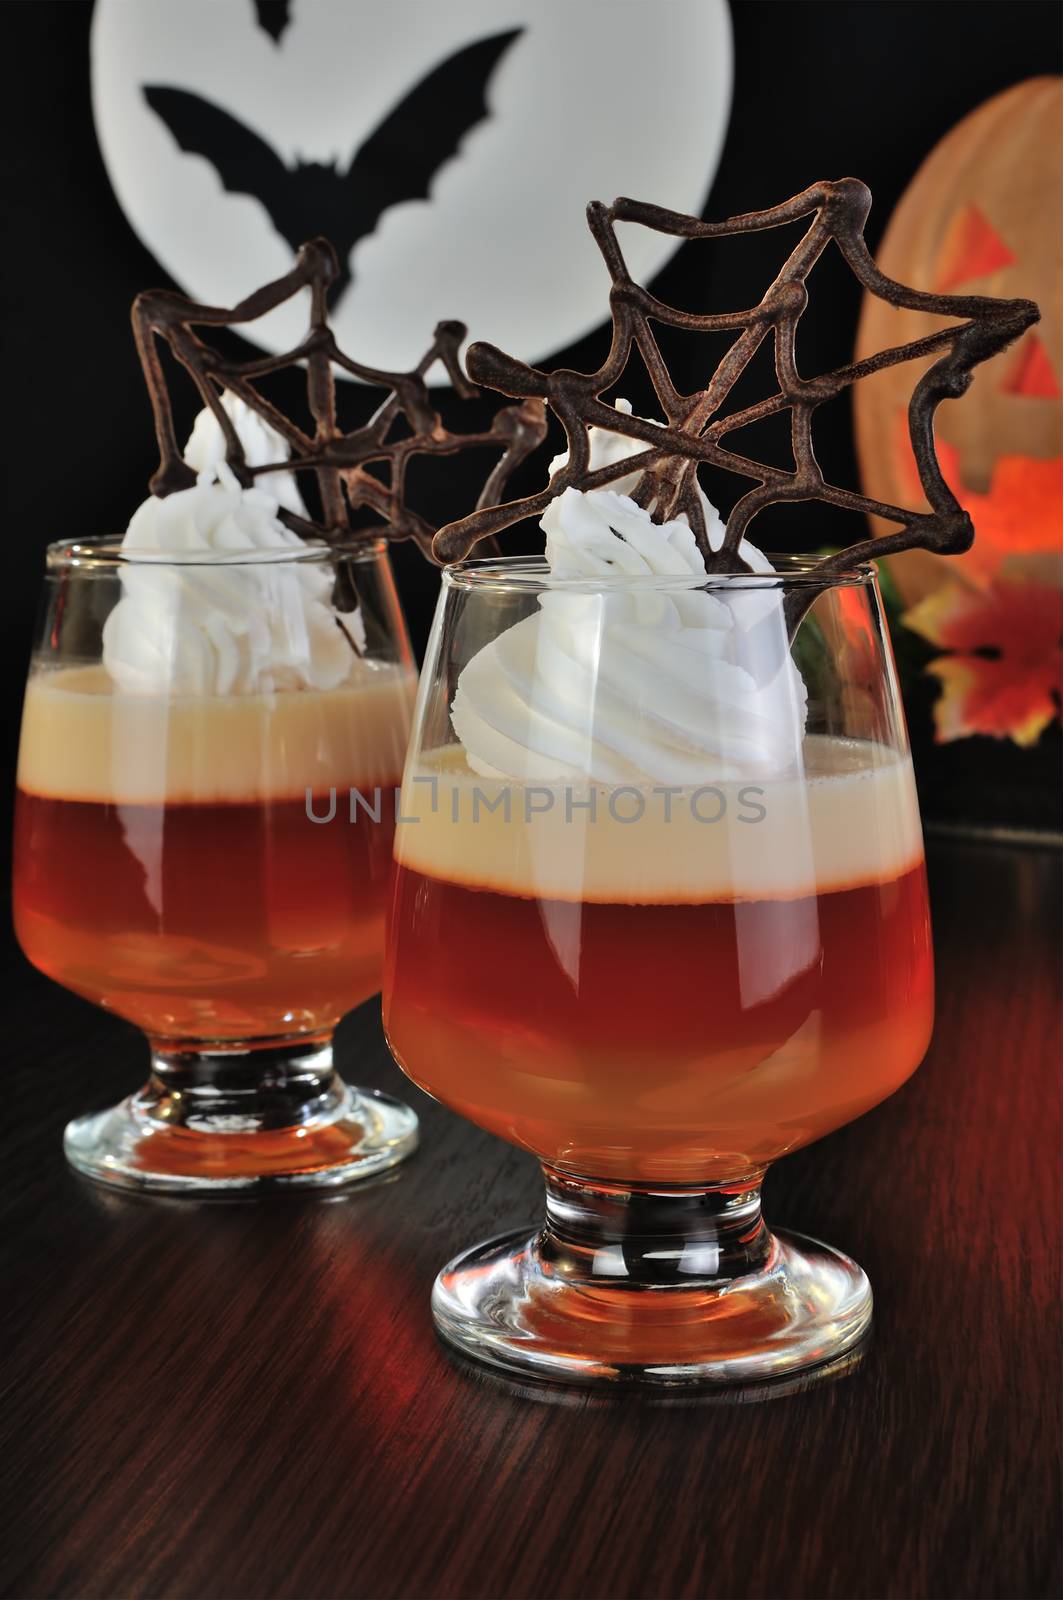 Halloween dessert in a glass by Apolonia